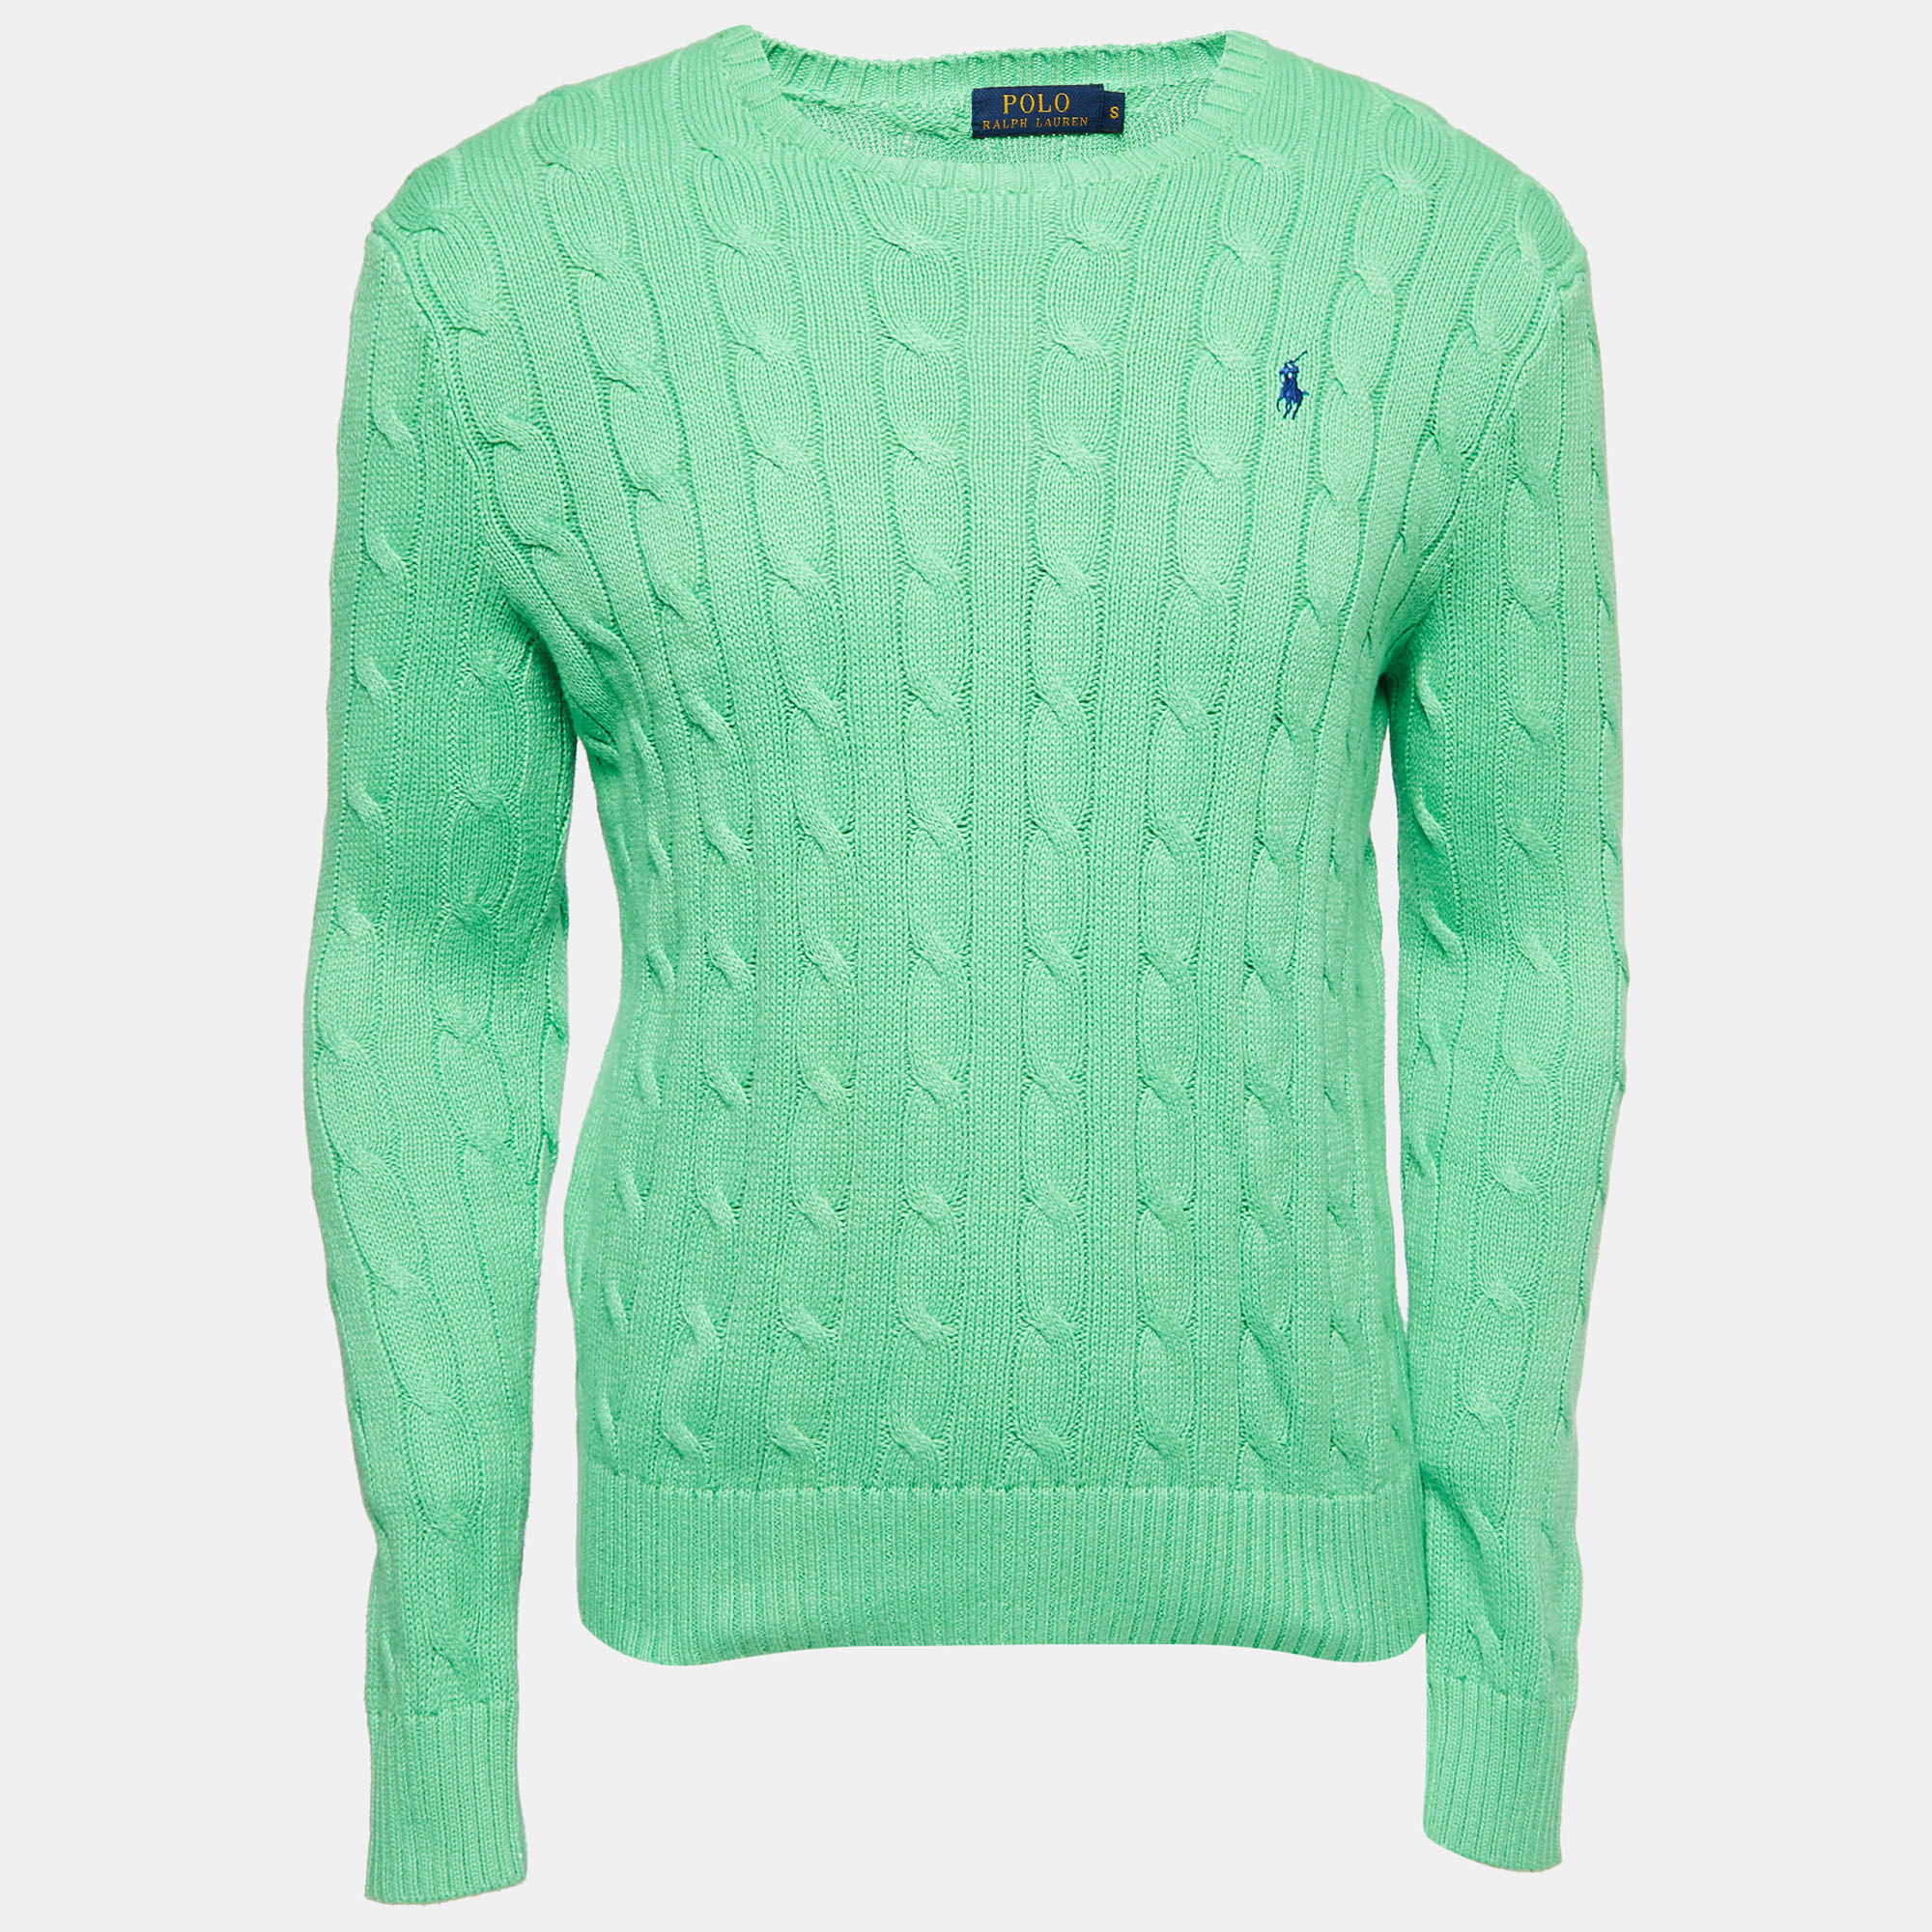 Polo Ralph Lauren Green Cable Knit Crew Neck Sweater S